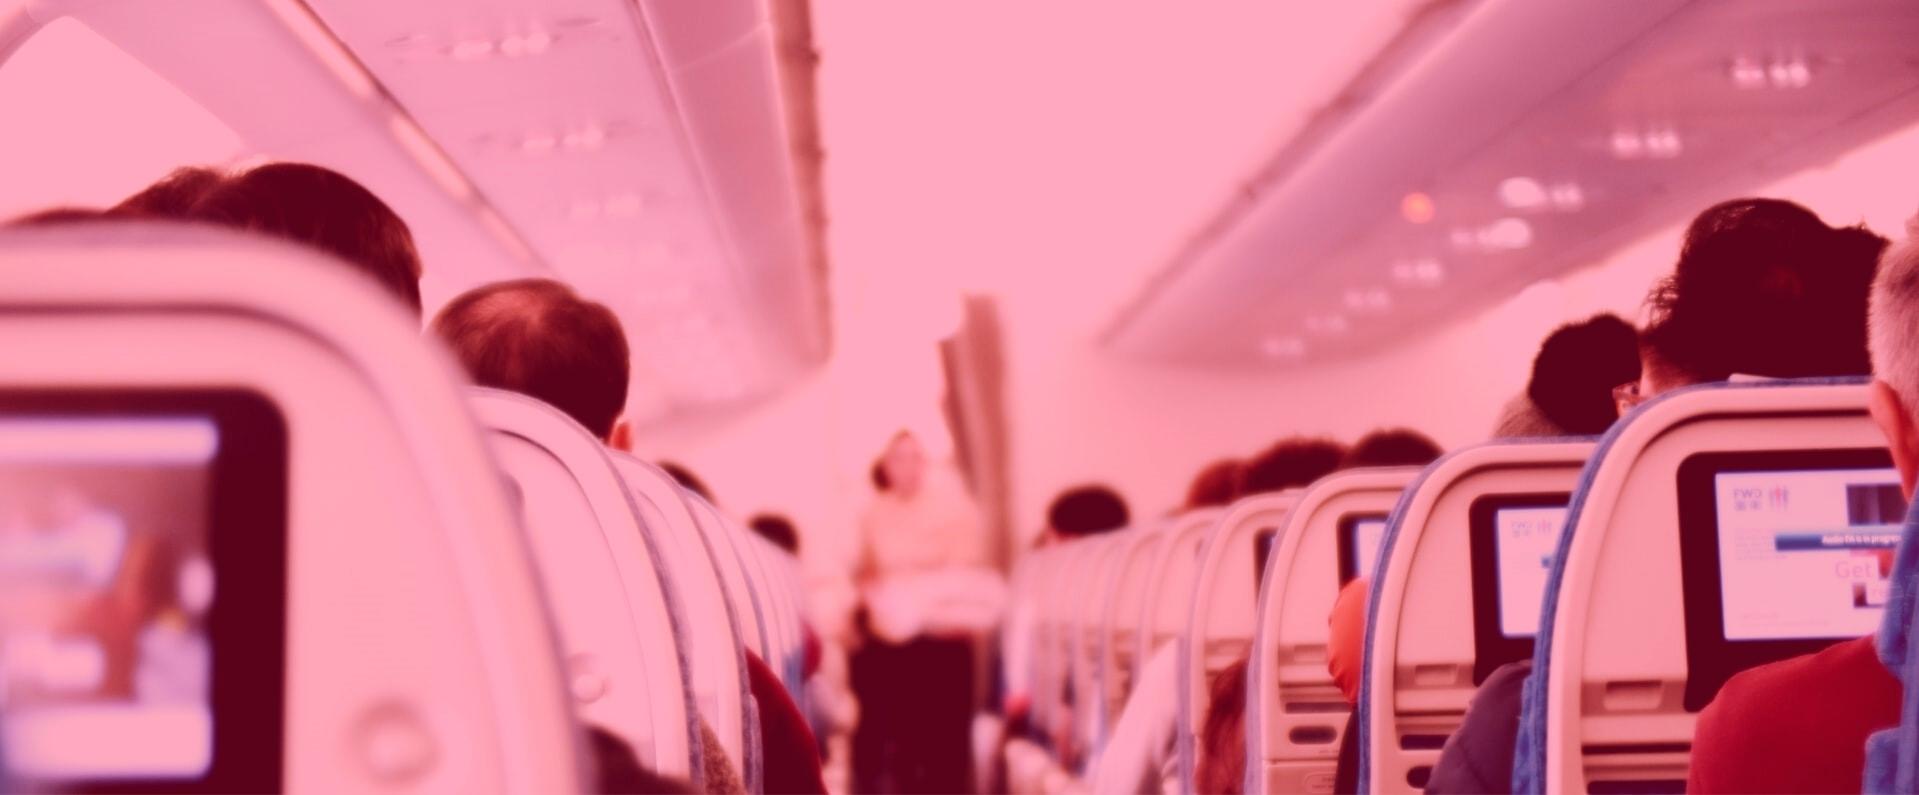 21 things to do on a 21 hour flight